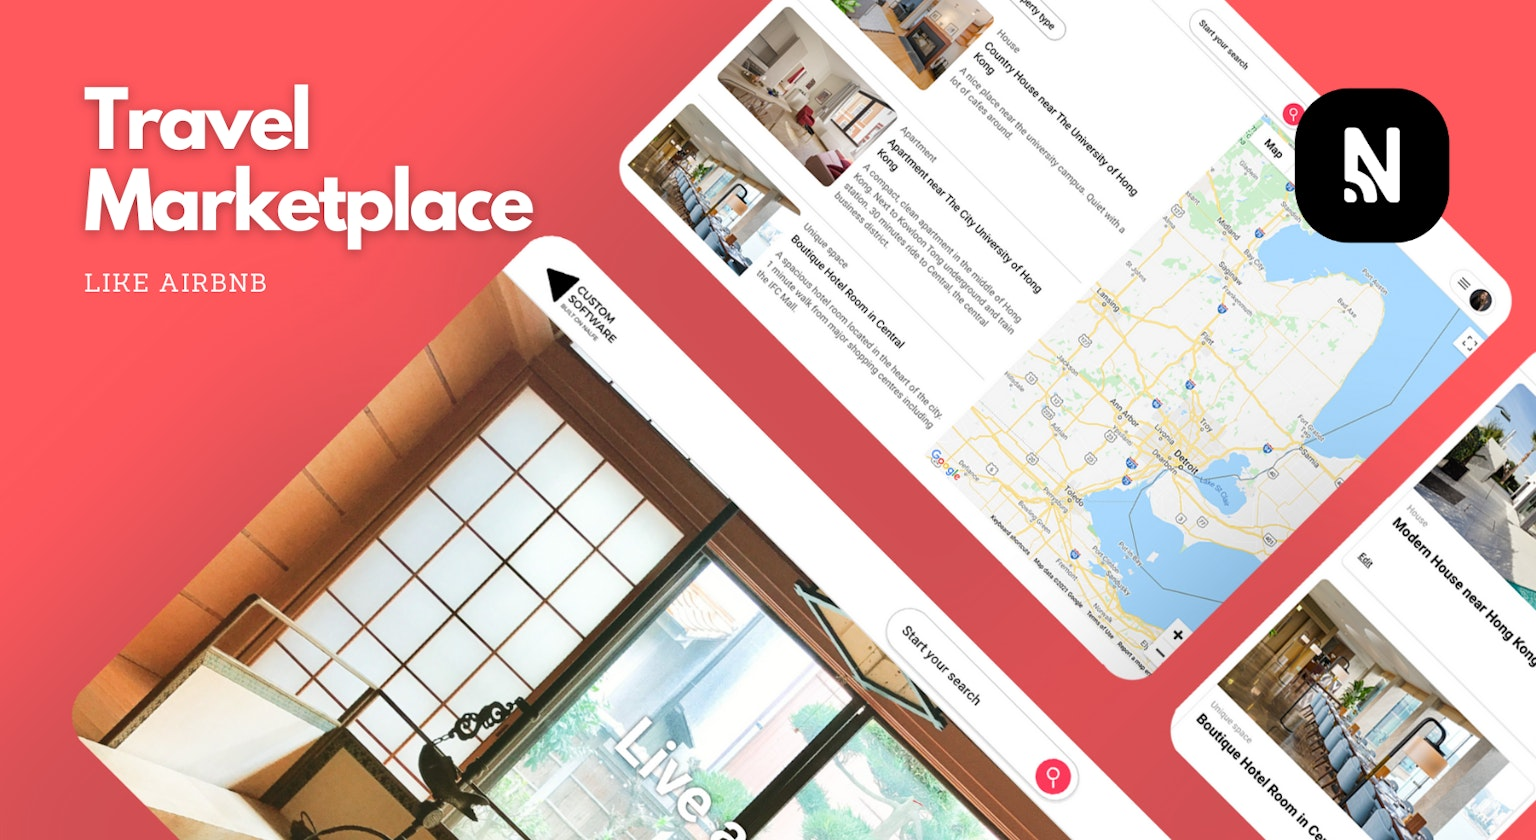 13. Travel Marketplace like Airbnb